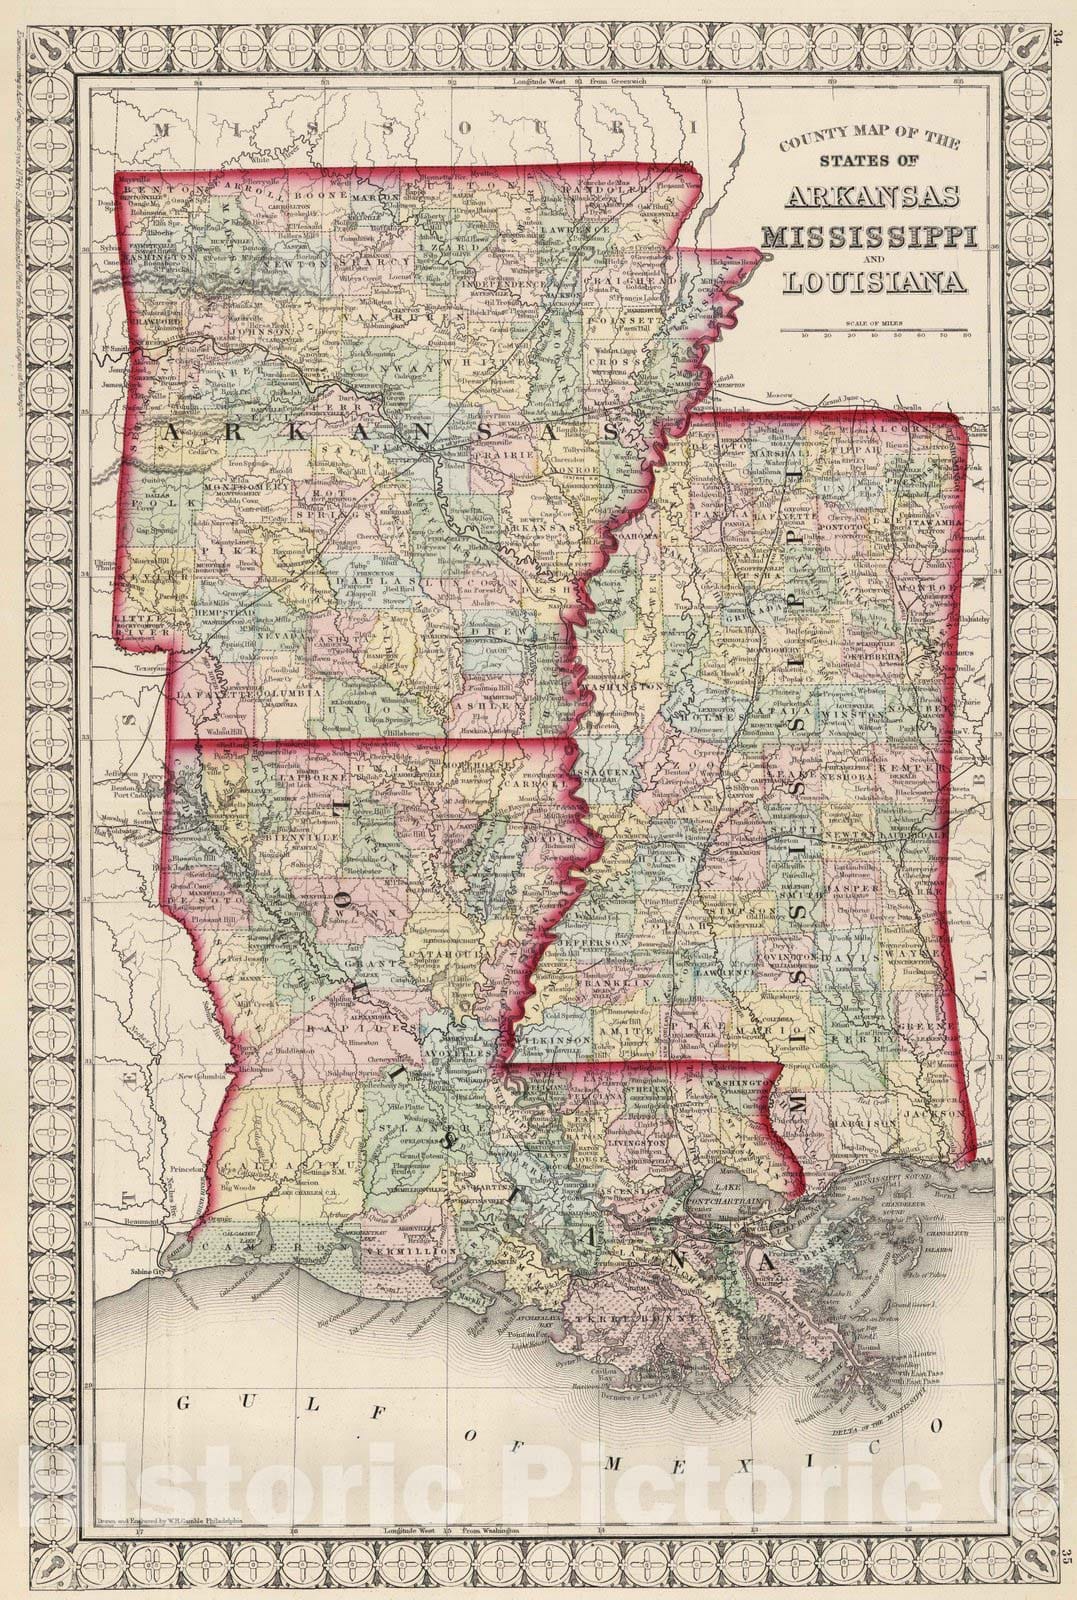 Historic Map : National Atlas - 1874 County Map of the States of Arkansas, Mississippi, and Louisiana. - Vintage Wall Art